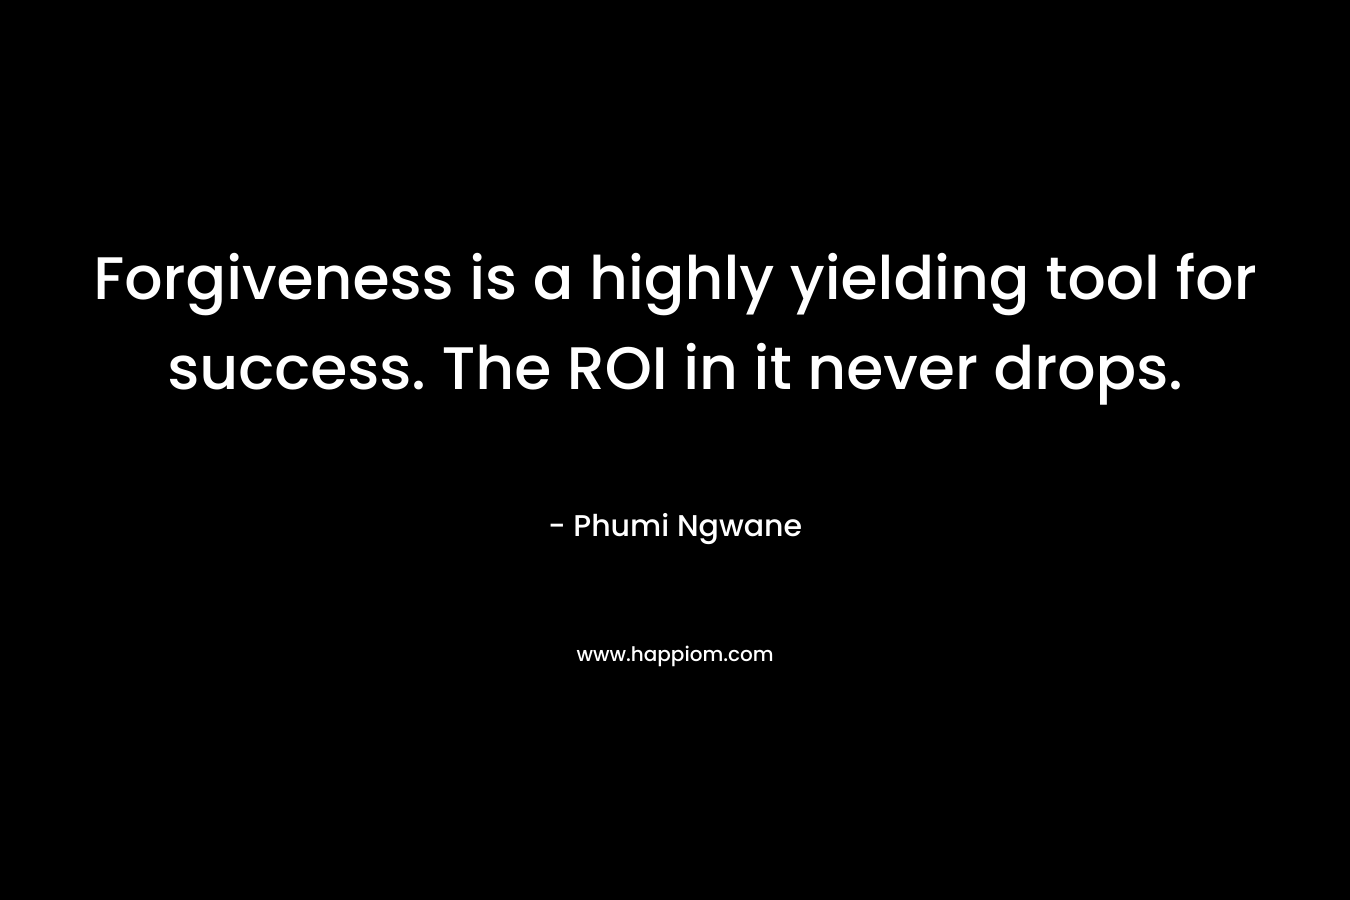 Forgiveness is a highly yielding tool for success. The ROI in it never drops. – Phumi Ngwane